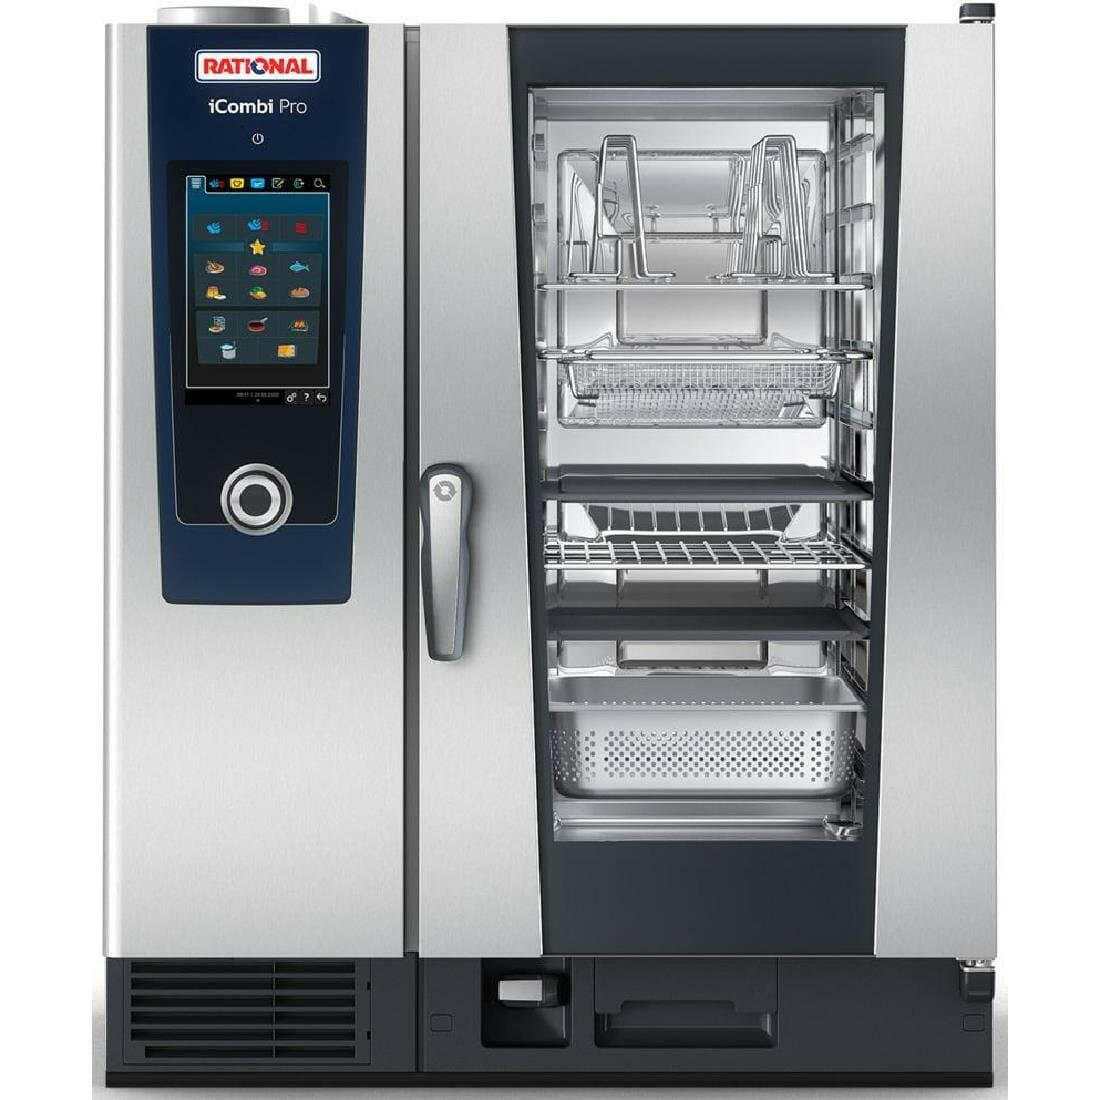 Rational Electric iCombi Pro Combi Oven ICP 10 x 1/1GN